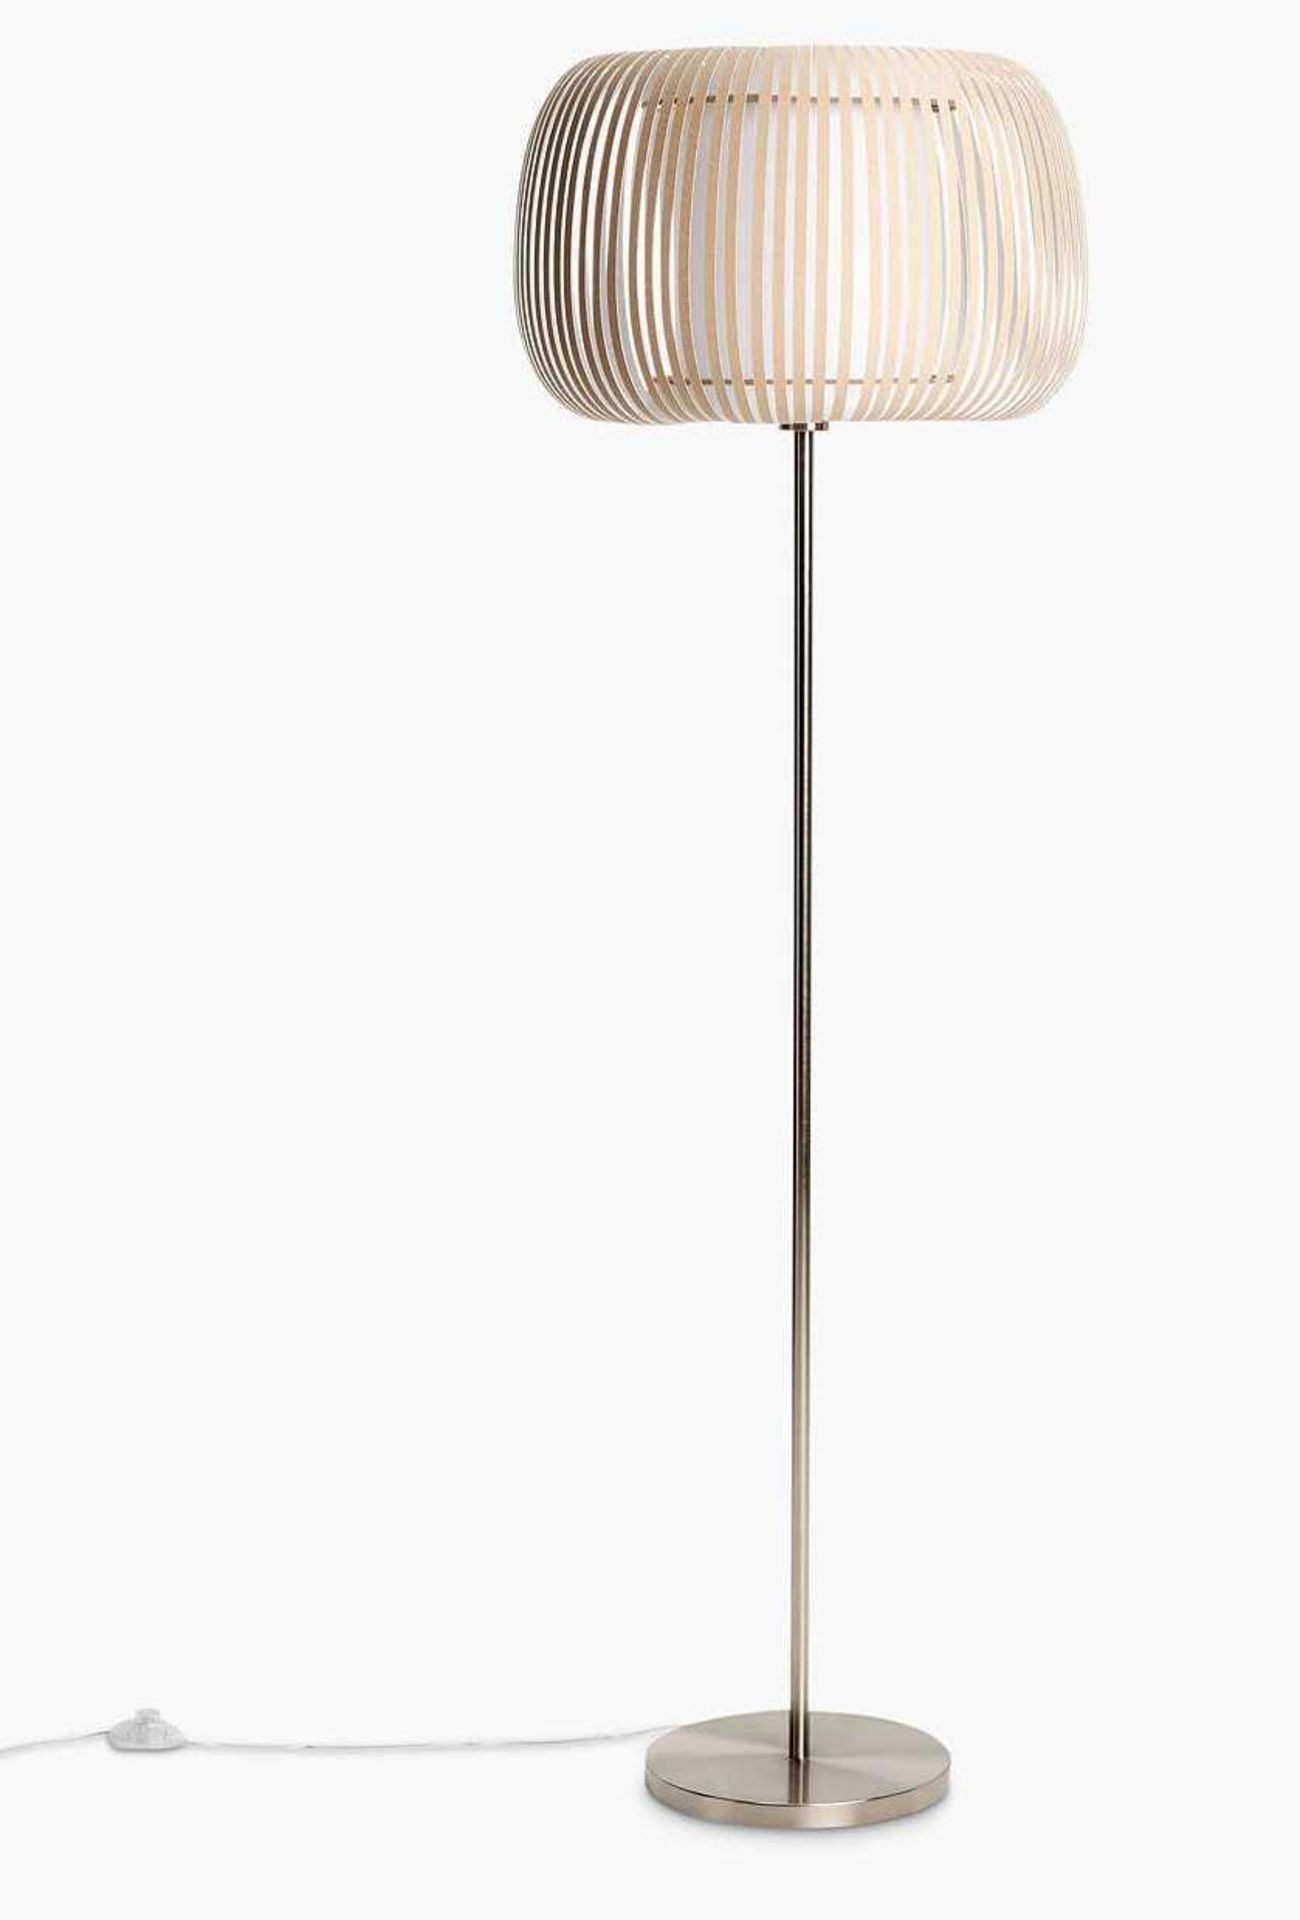 Rrp £175 When Complete Boxed John Lewis Harmony Floor Lamp (Shade Only)